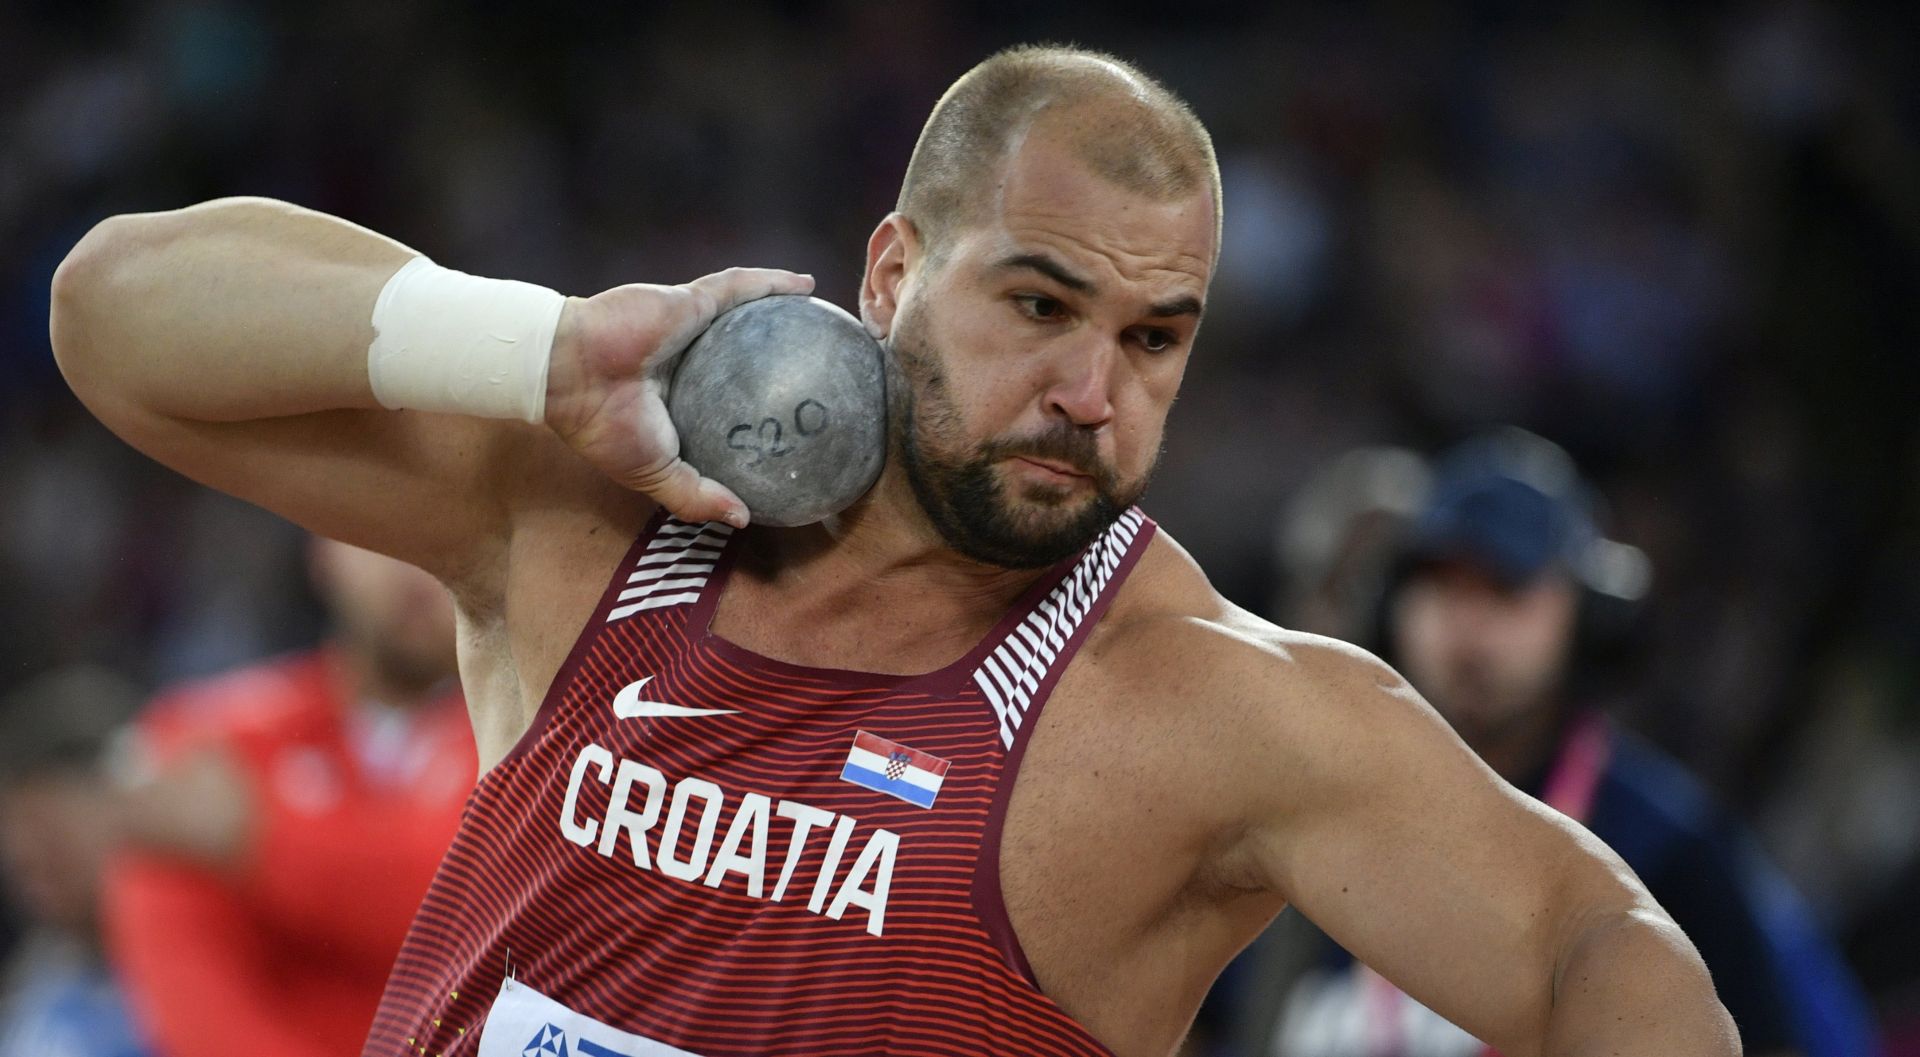 epa06129196 Stipe Zunic of Croatia competes in the men's Shot Put final at the London 2017 IAAF World Championships in London, Britain, 06 August 2017.  EPA/FRANCK ROBICHON